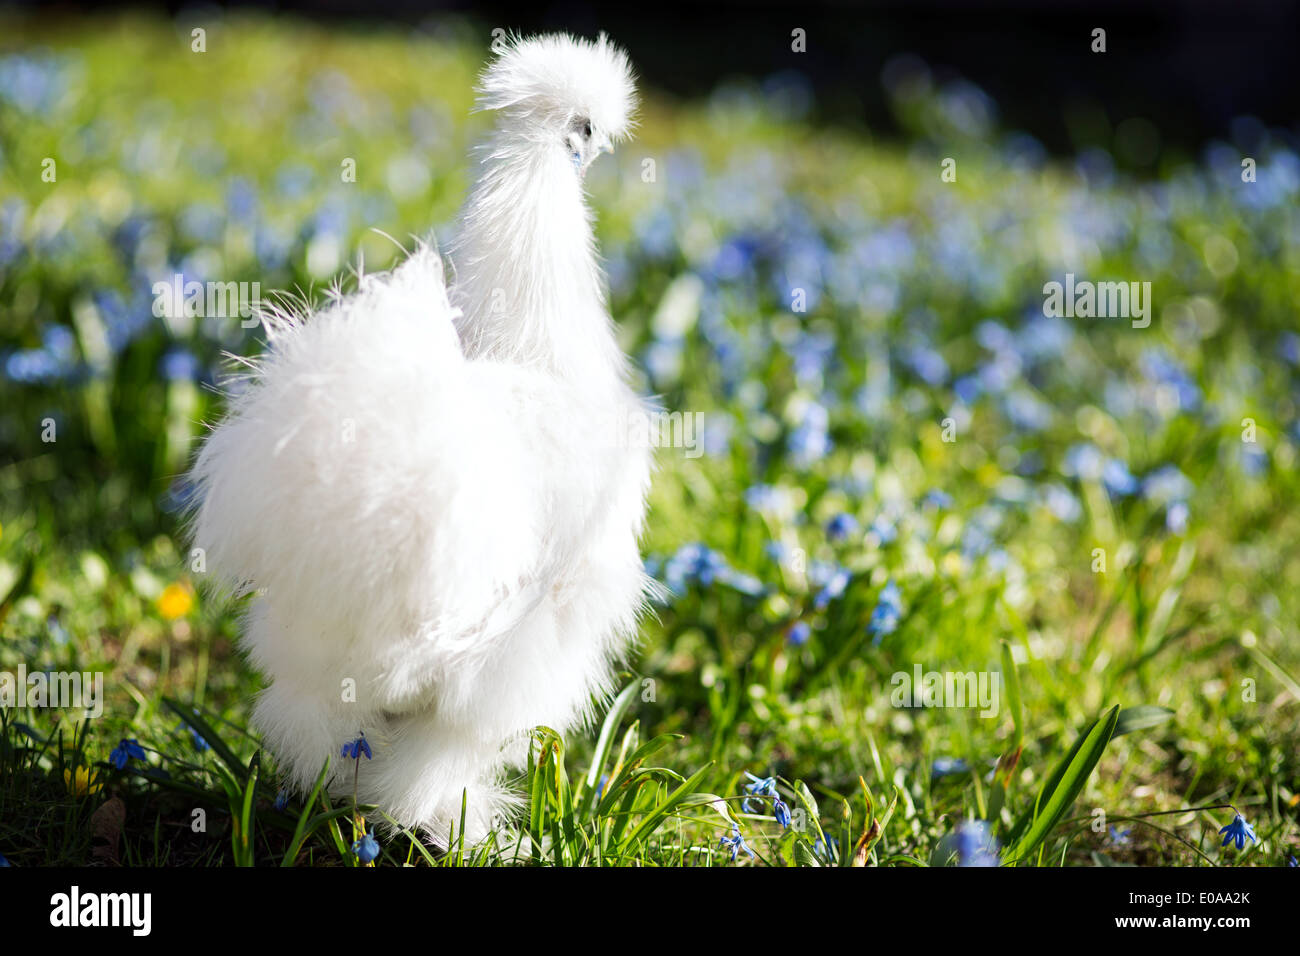 Chicken staring at the flowers Stock Photo